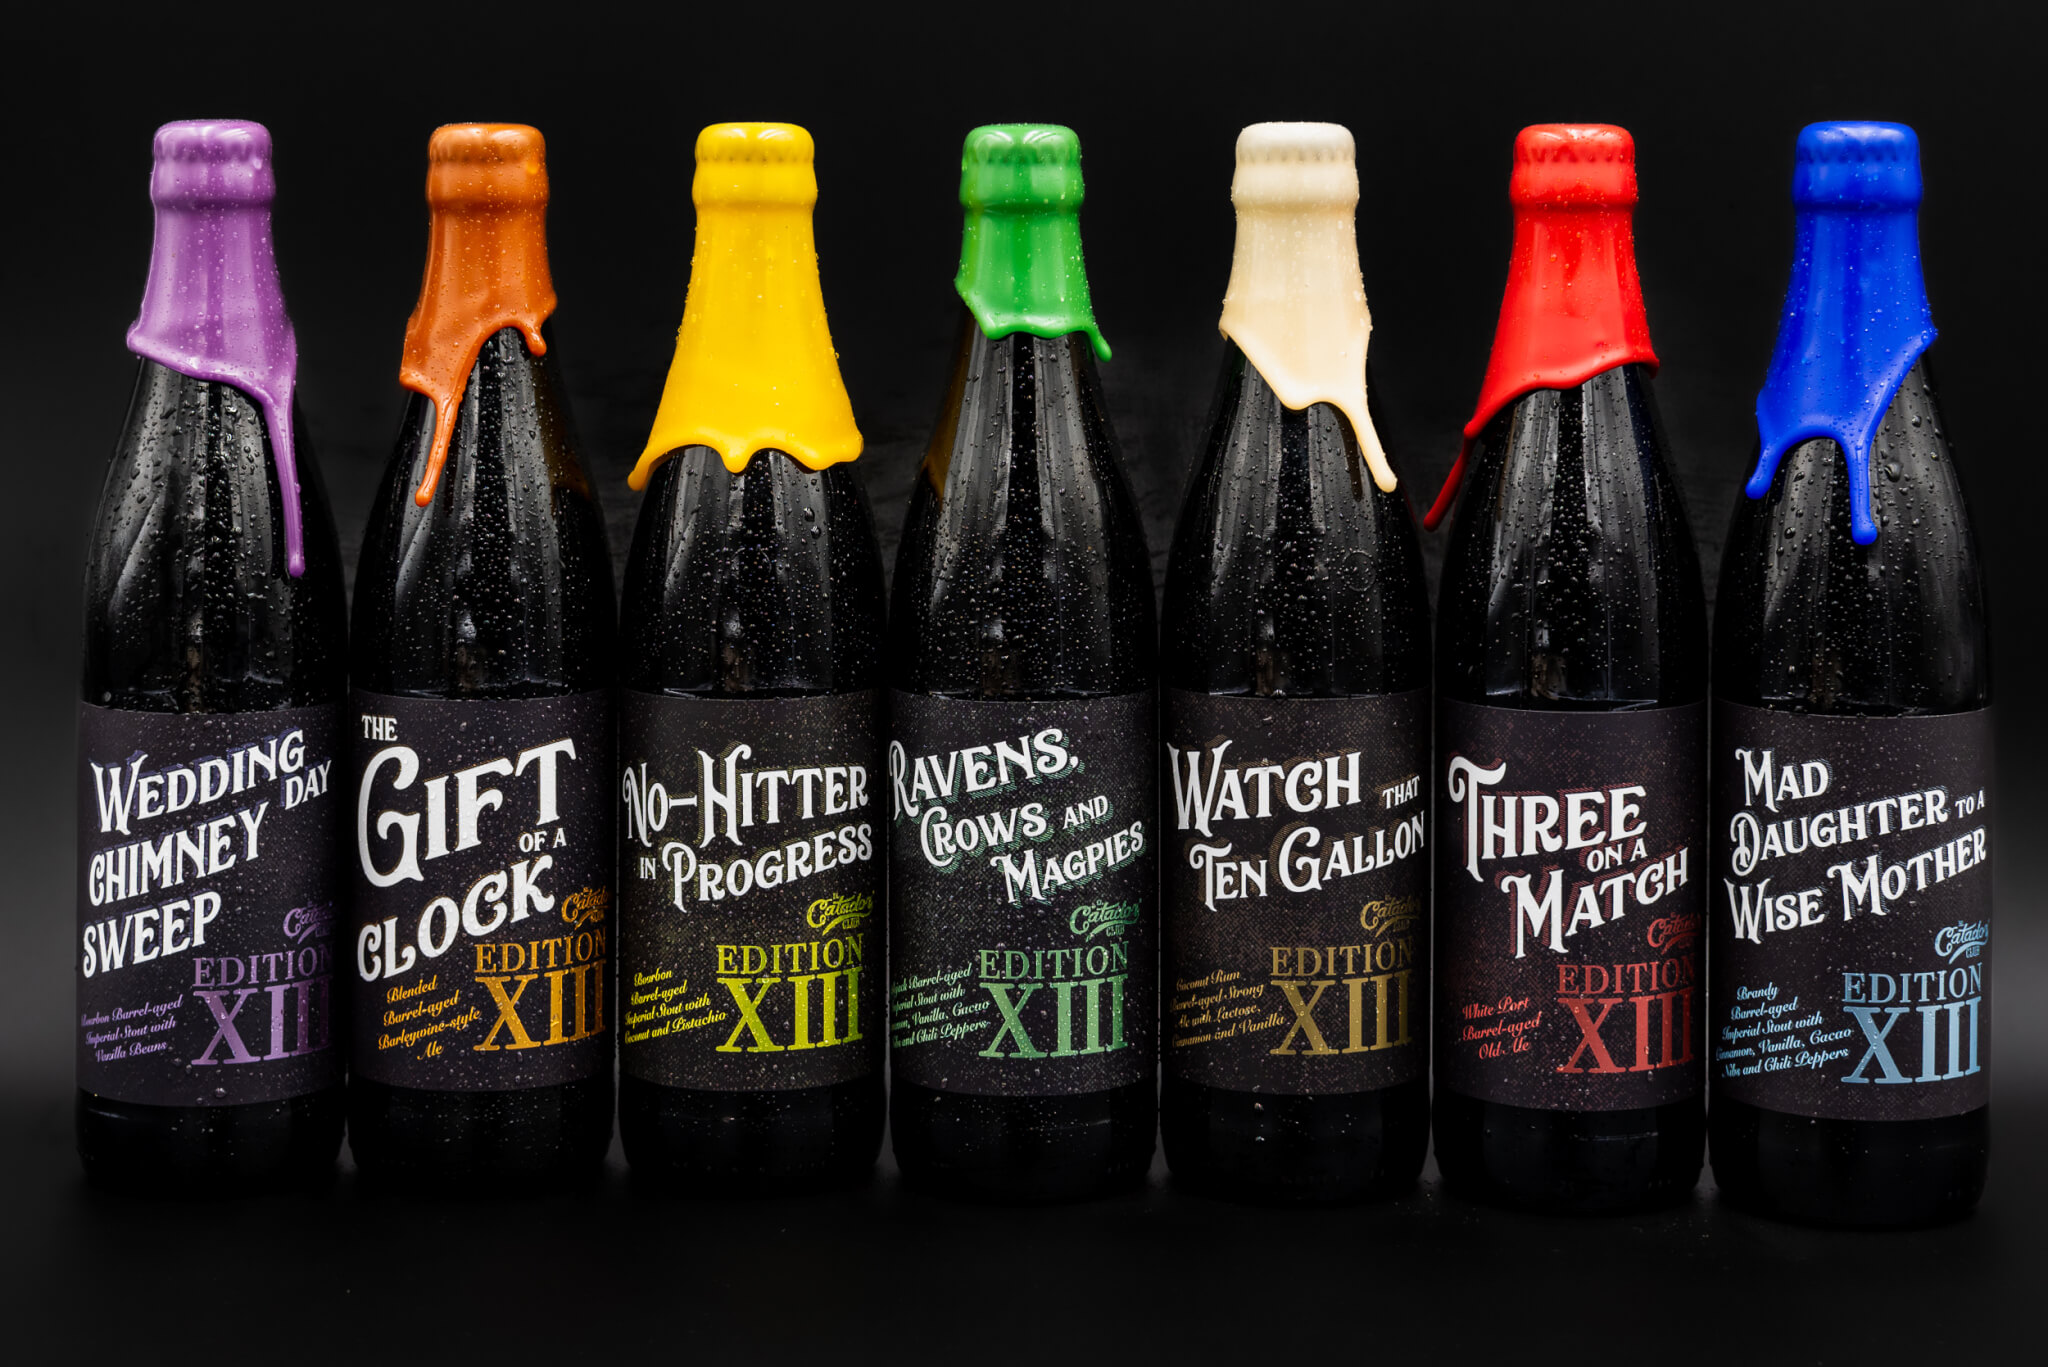 The lineup of bottles from the 13th edition of Cigar City Brewing's El Catador Barrel-aged Beer Club.